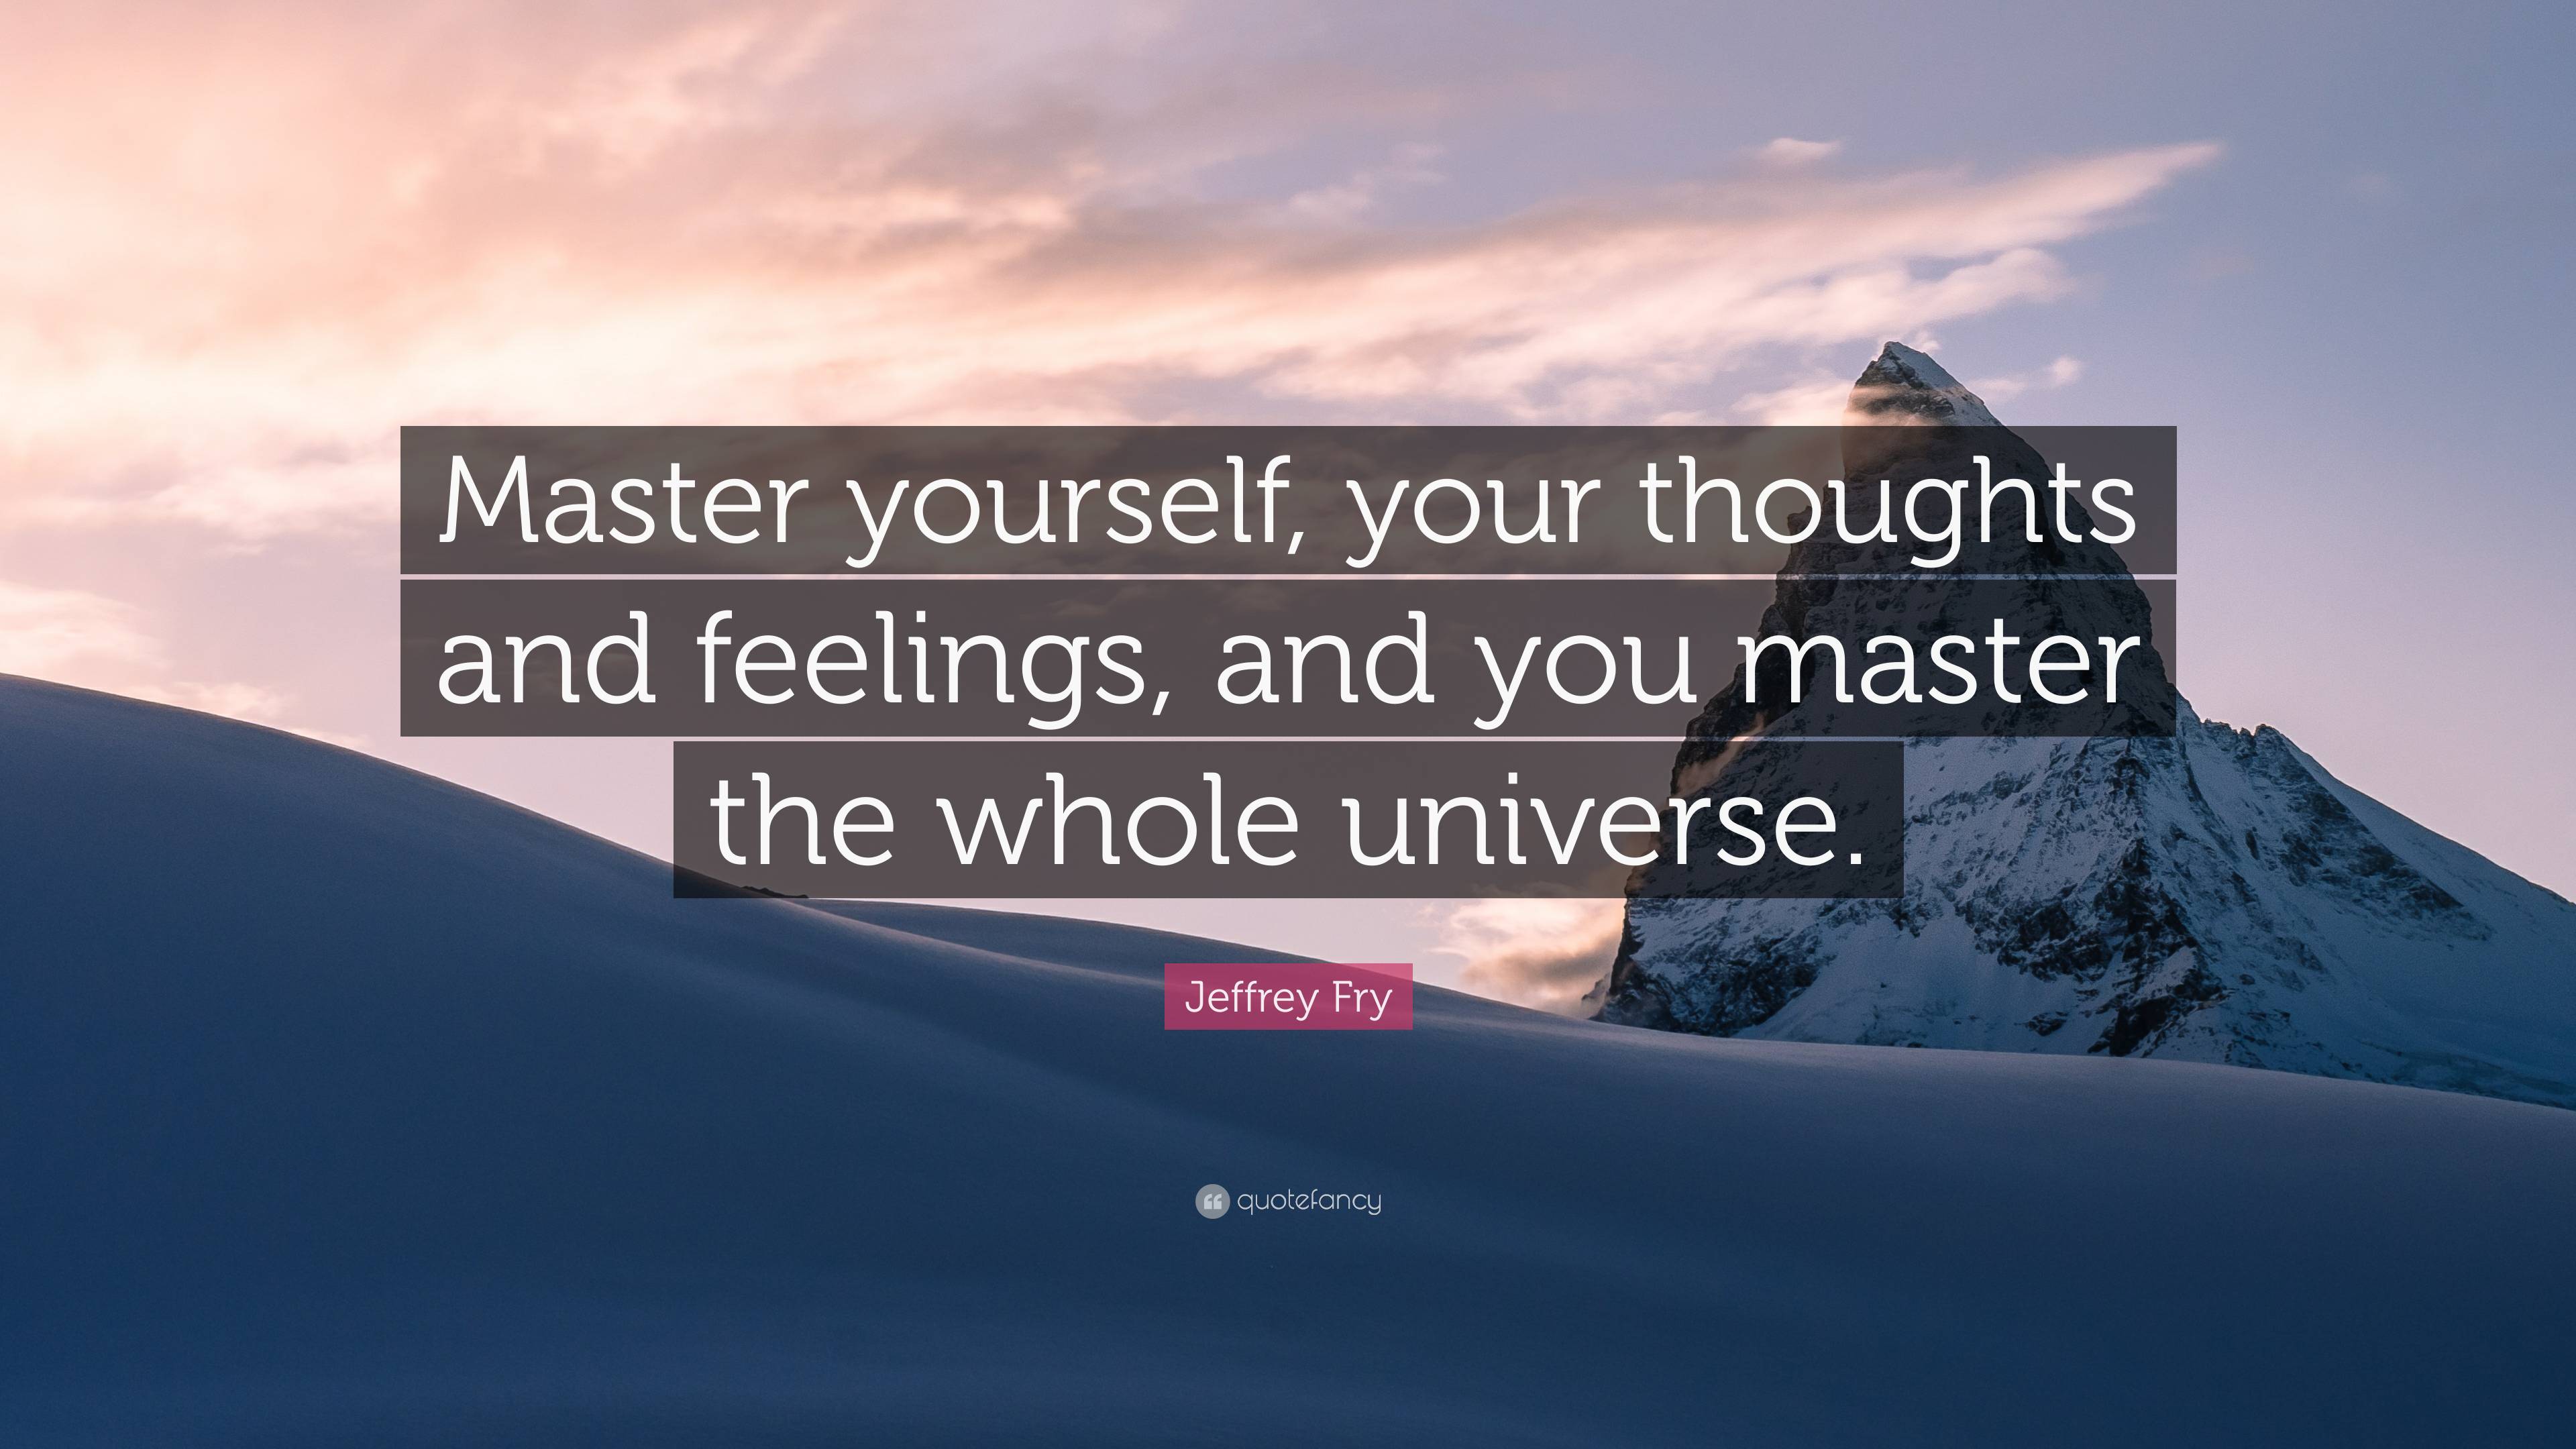 50 Best Master Yourself Quotes